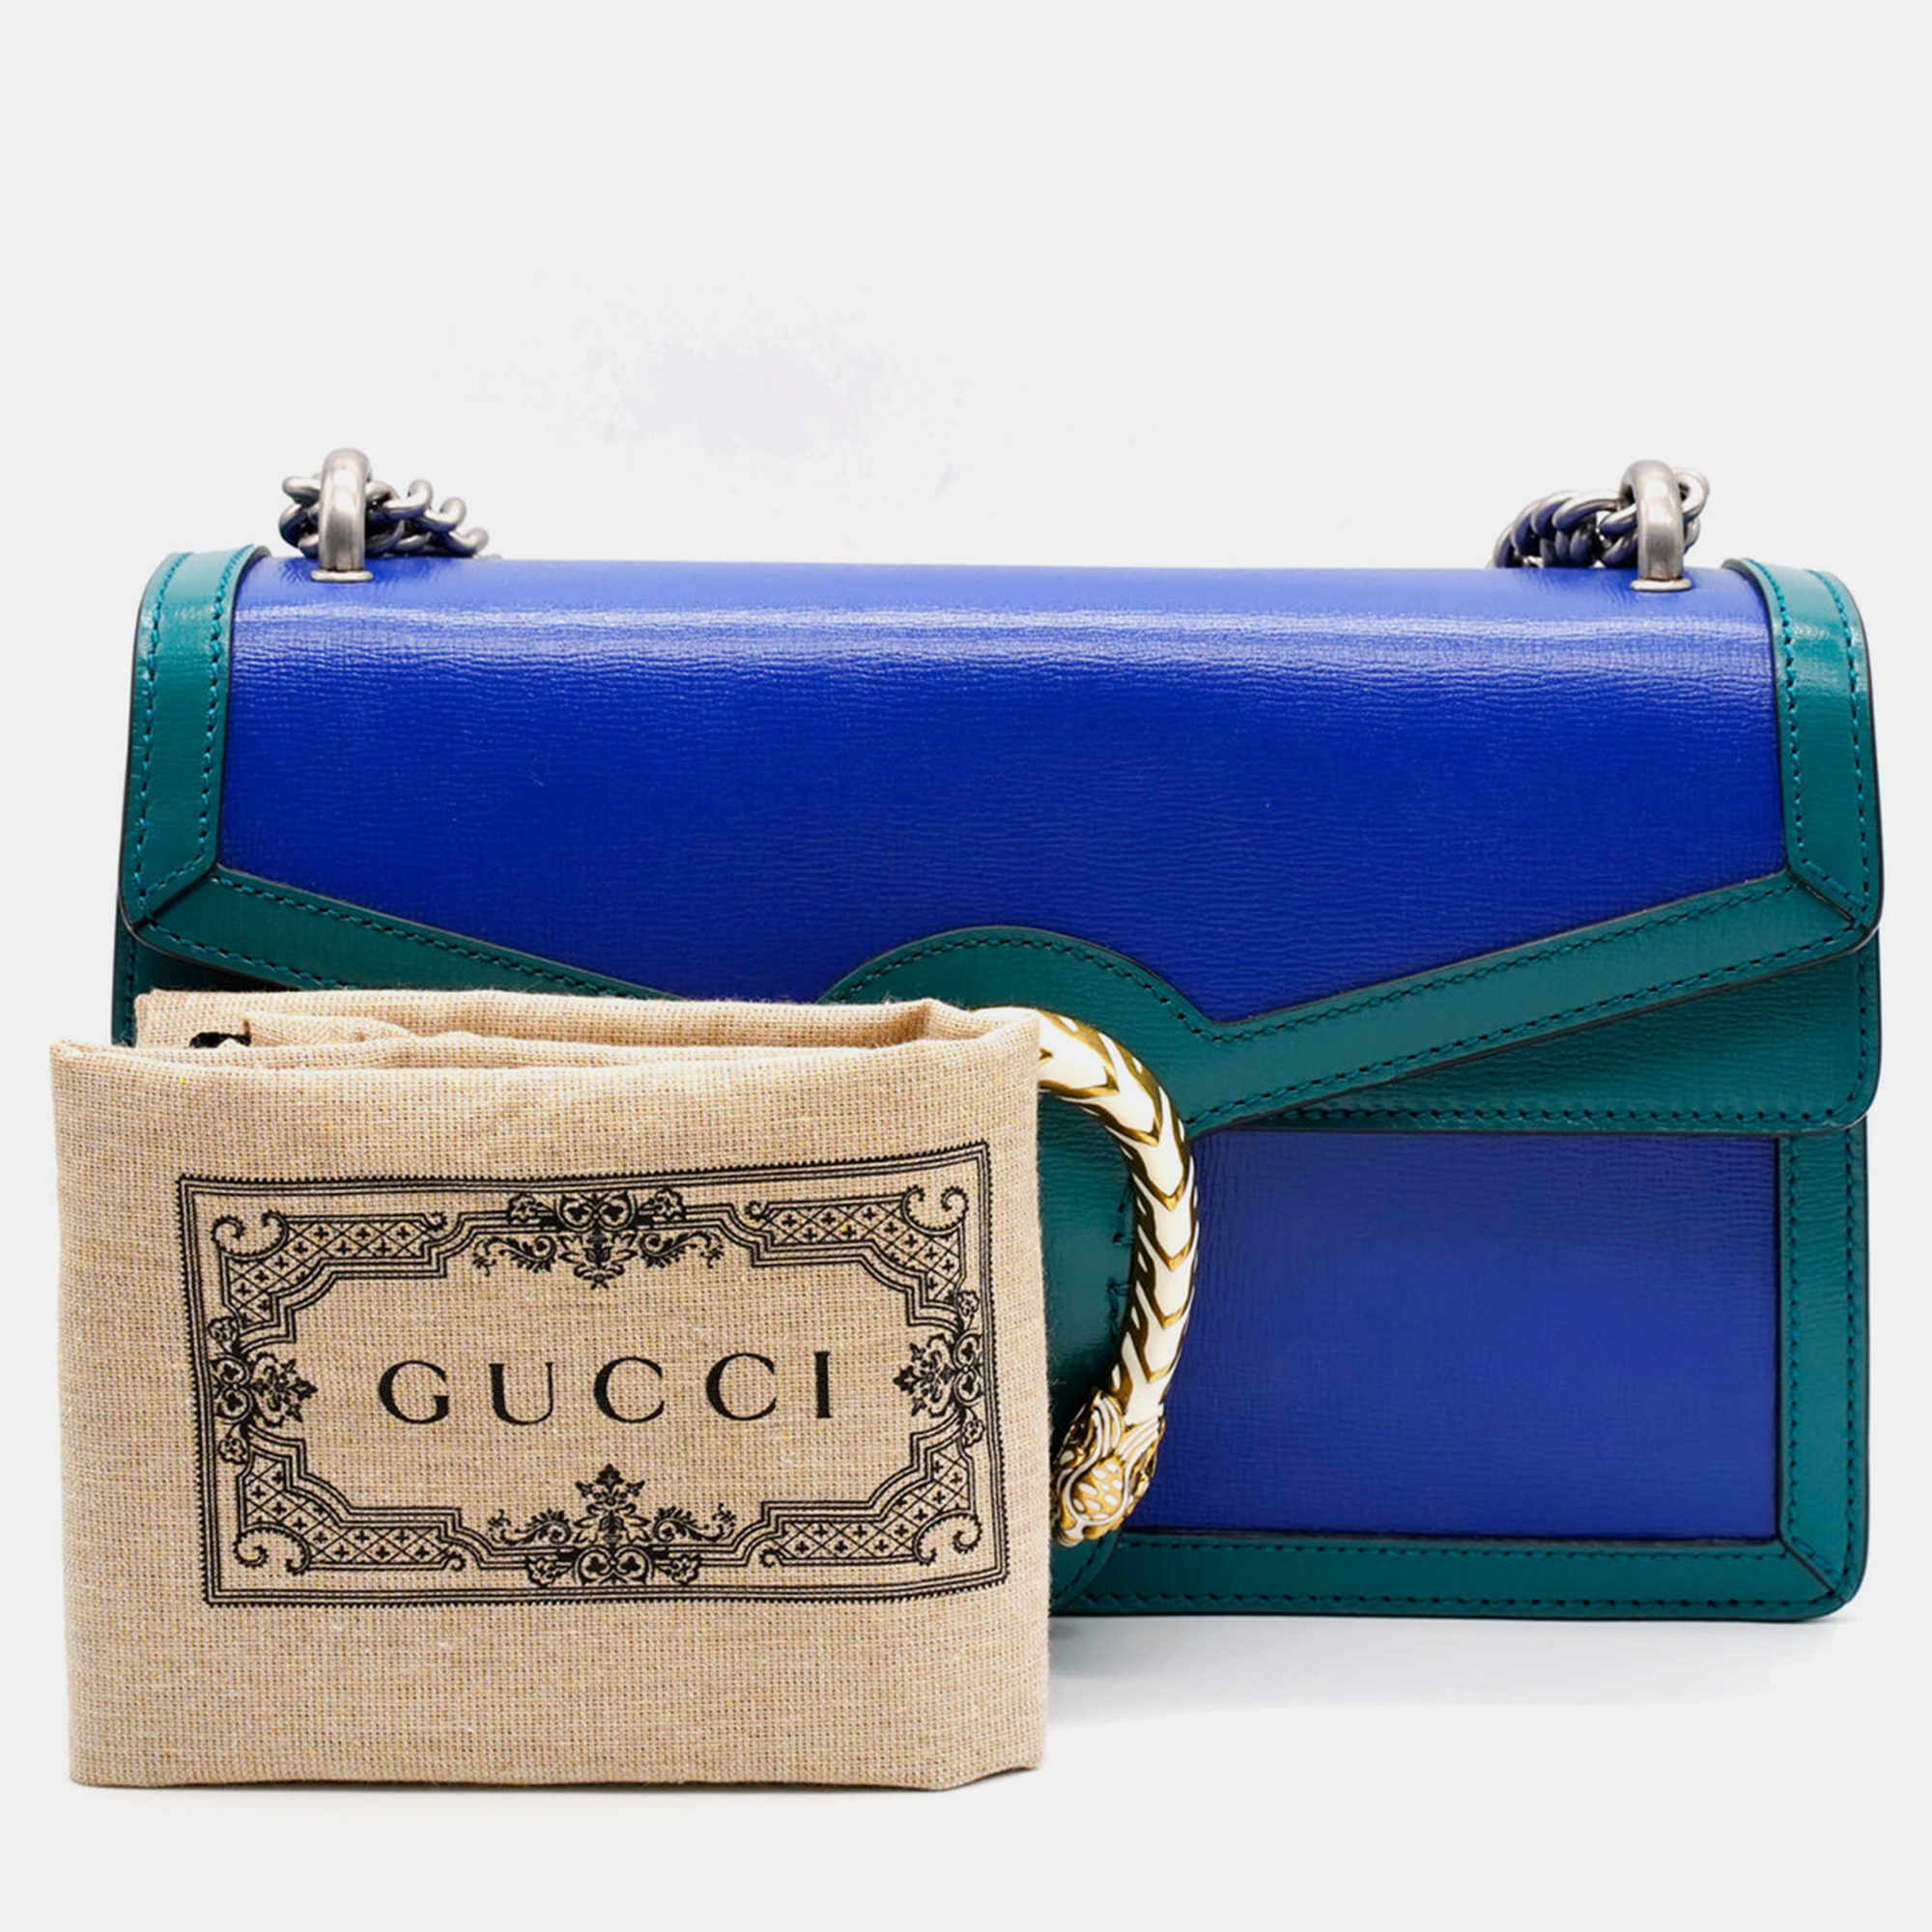 Gucci Blue/Green Leather Small Dionysus Shoulder Bag